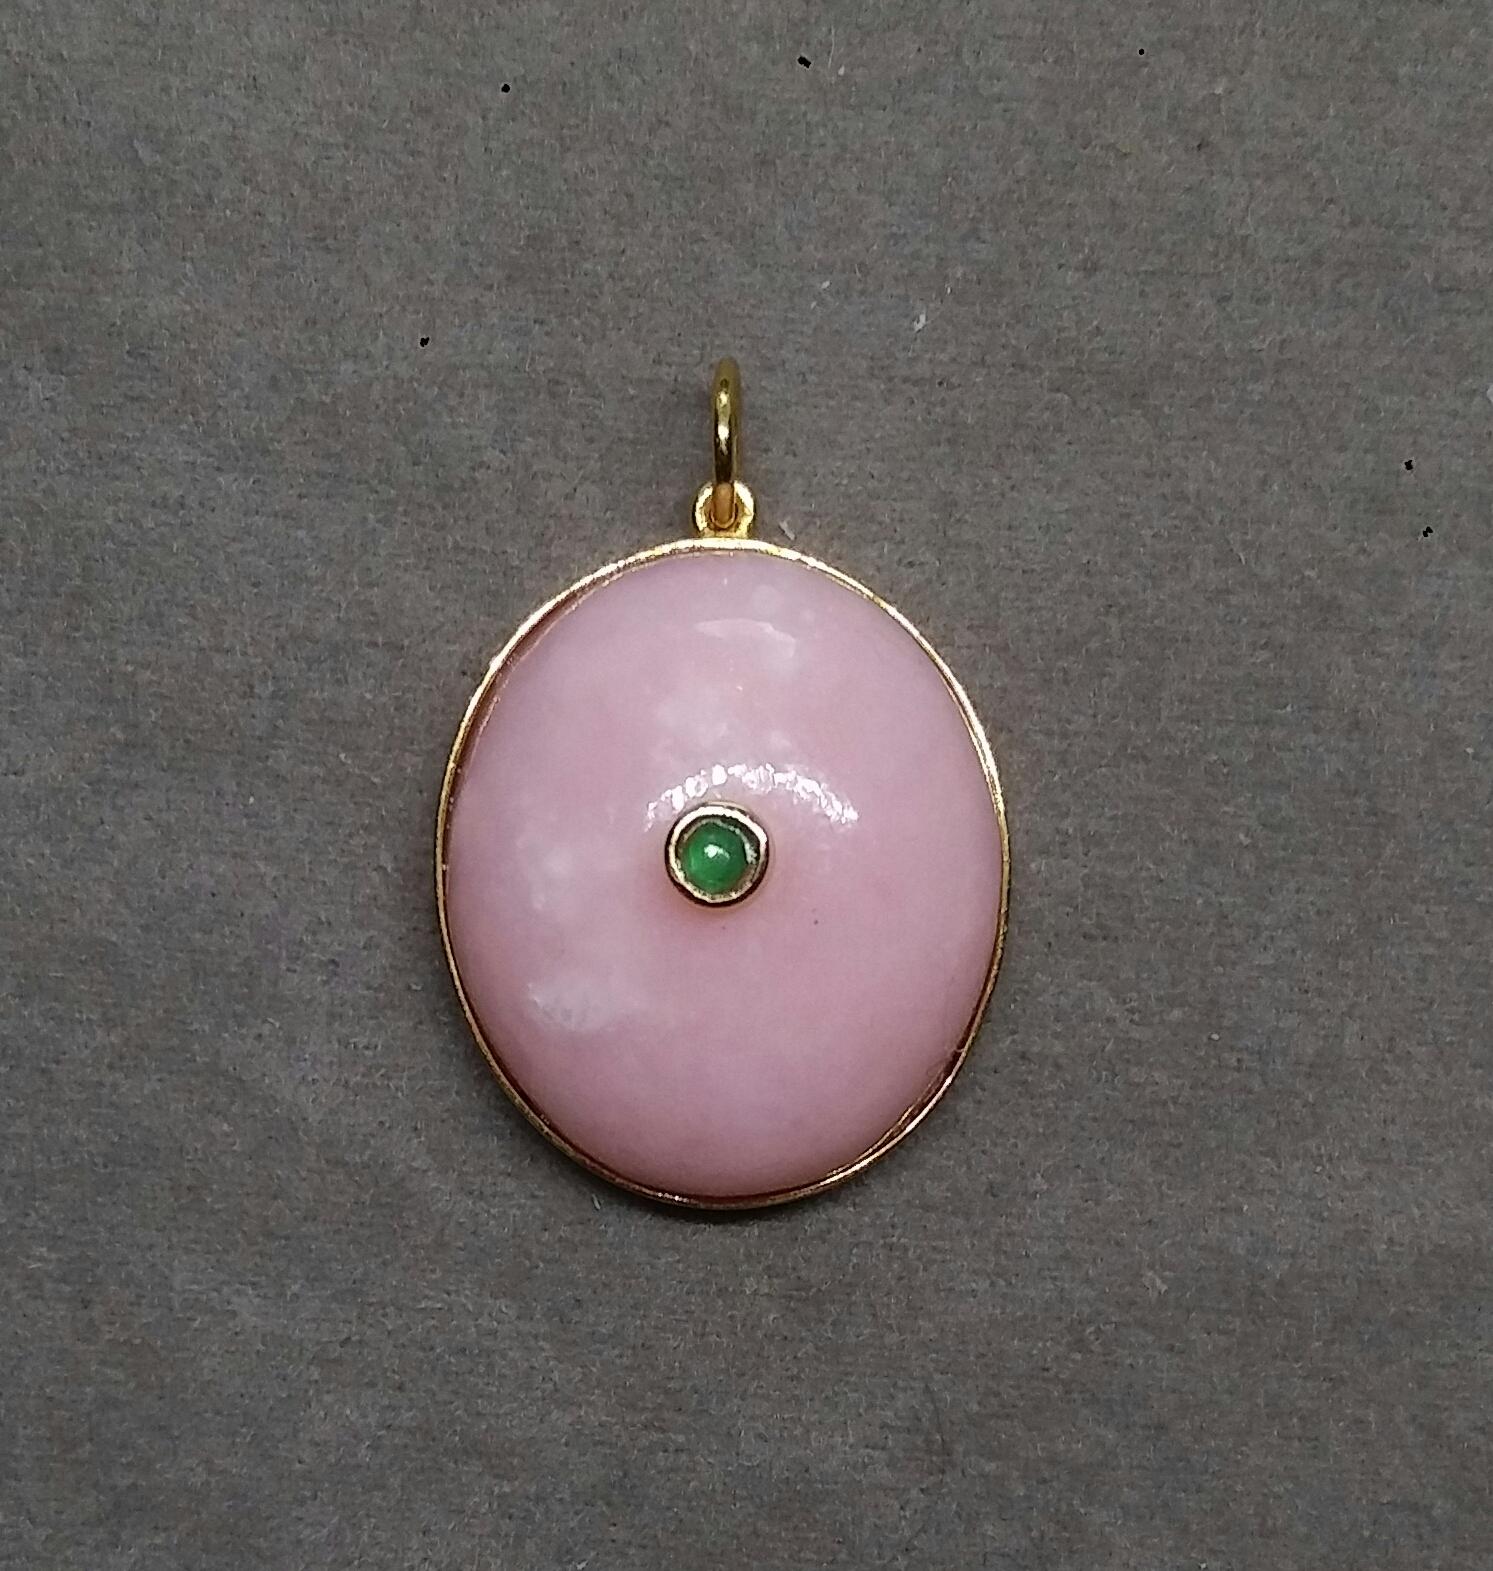 Simple chic Oval Shape Pink Opal pendant measuring 19mm x 22 mm set in solid 14 Kt. yellow gold bezel and with a Round Shape Plain Emerald Cab  in the center,set in a 14k yellow gold bezel
In 1978 our workshop started in Italy to make simple-chic